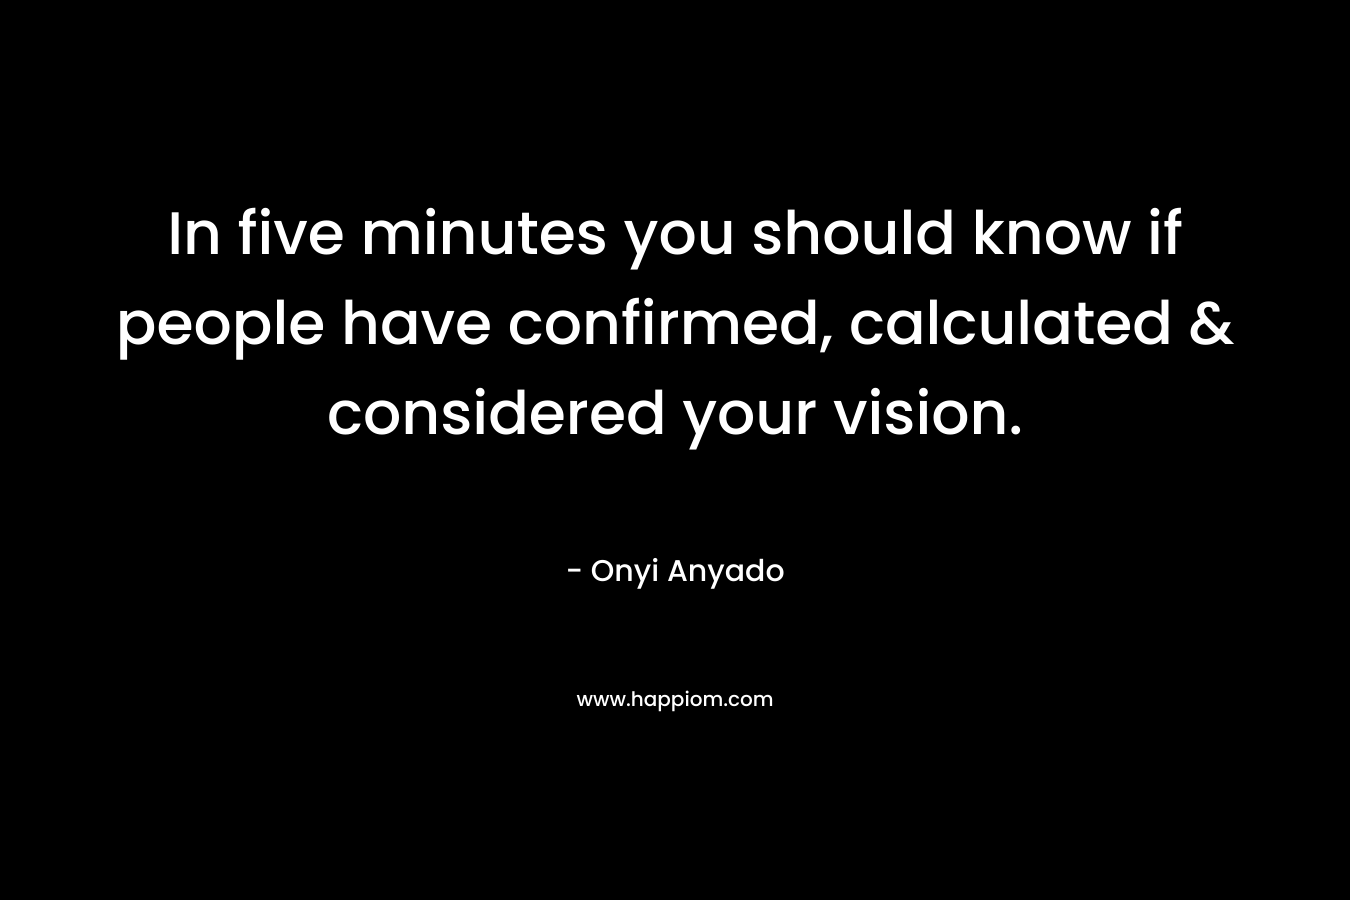 In five minutes you should know if people have confirmed, calculated & considered your vision.